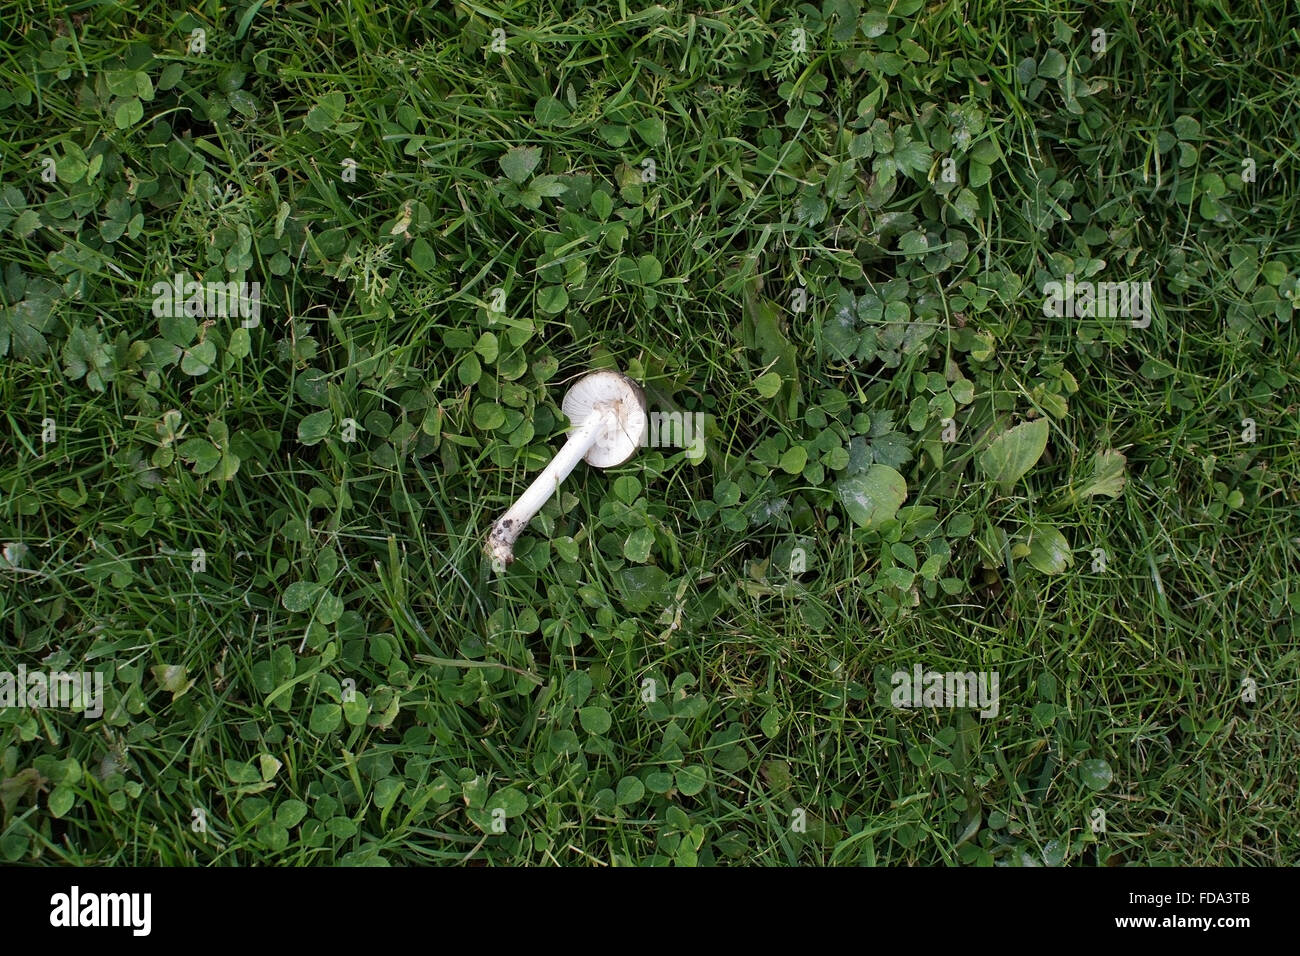 White mushroom in green grass with clover in Sweden in October. Stock Photo